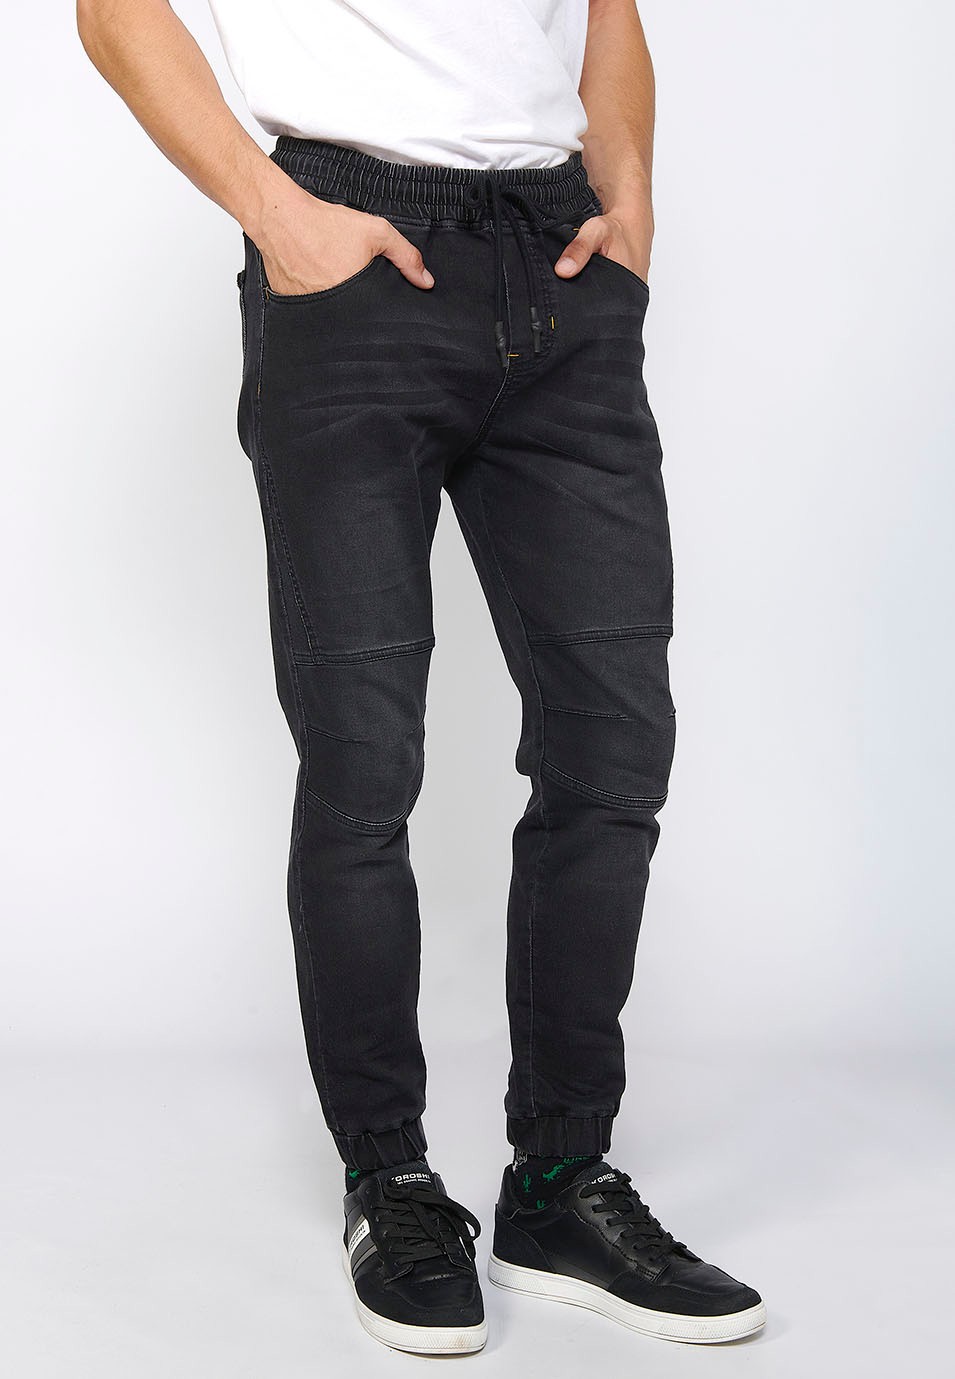 Long slim jogger pants fitted at the ankles with adjustable elastic waist and drawstring in Black for Men 3